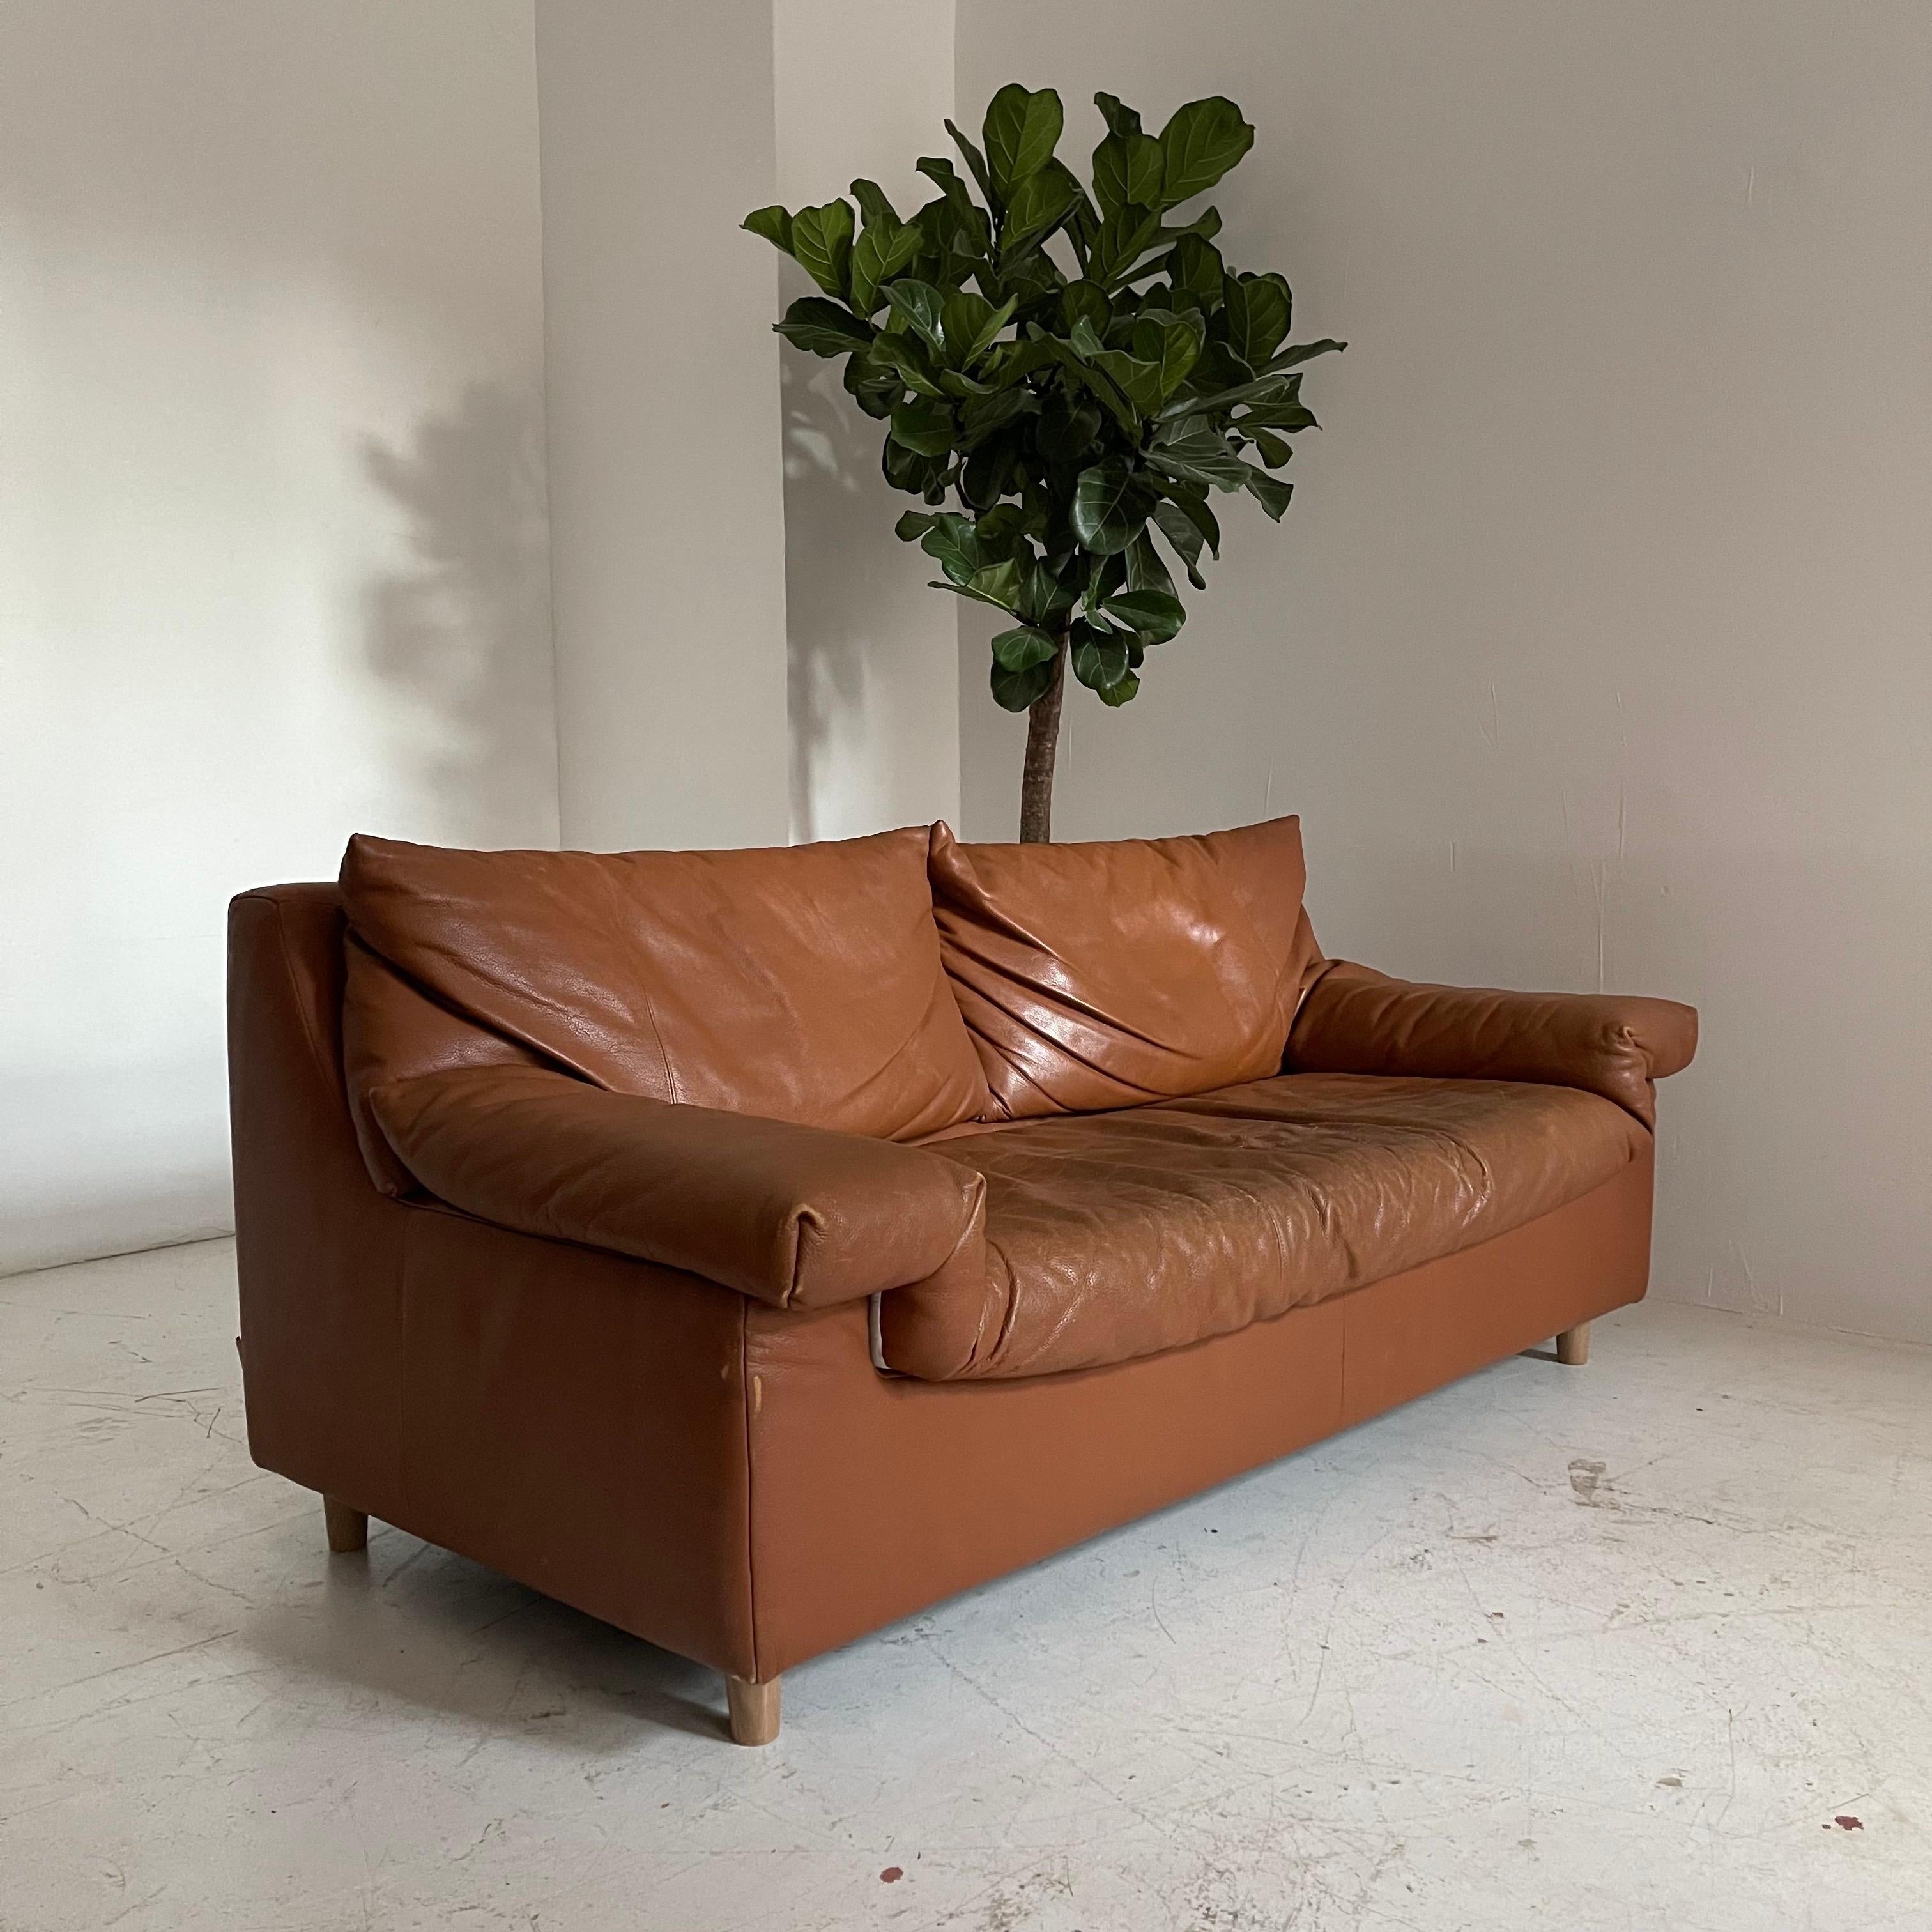 Vintage Patinated Cognac Leather Sofa by Cinna, France, 1970 For Sale 2